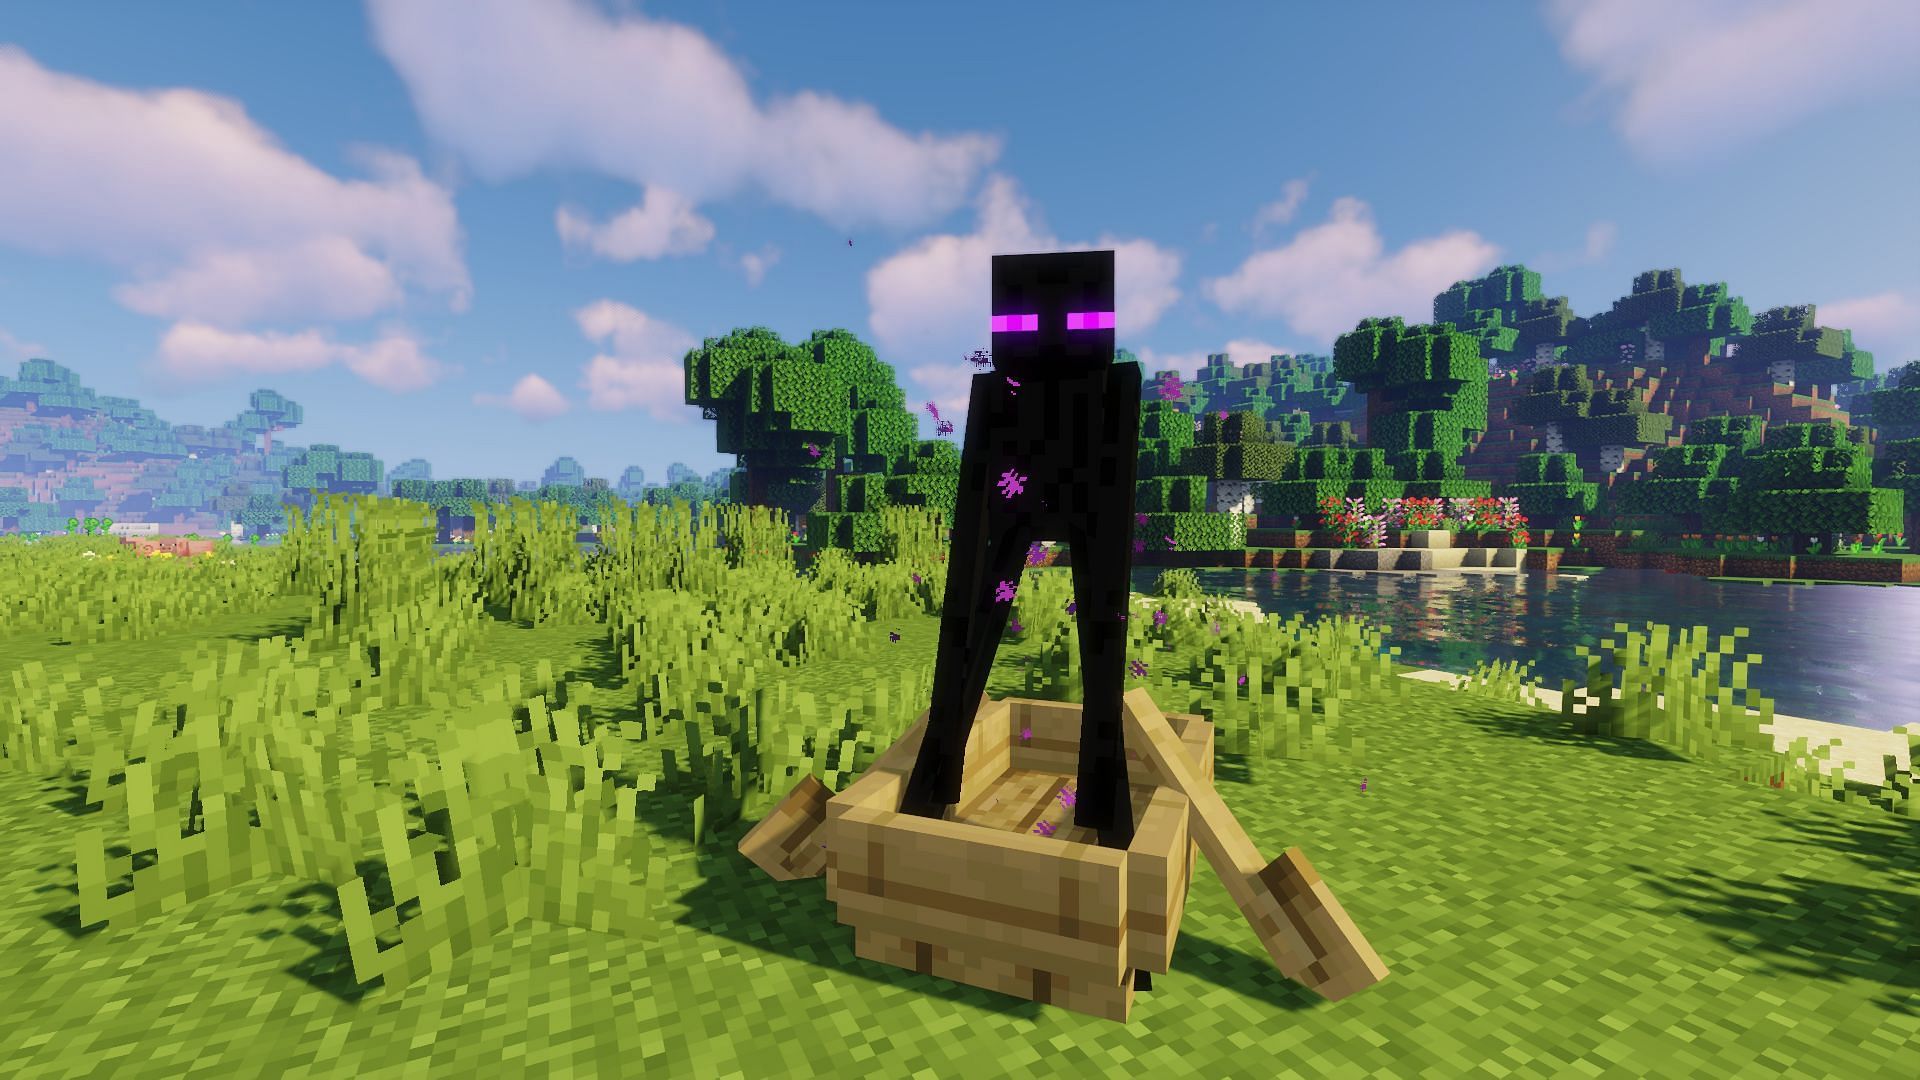 Trapping endermen in boats is a classic Java Edition trick (Image via Mojang)